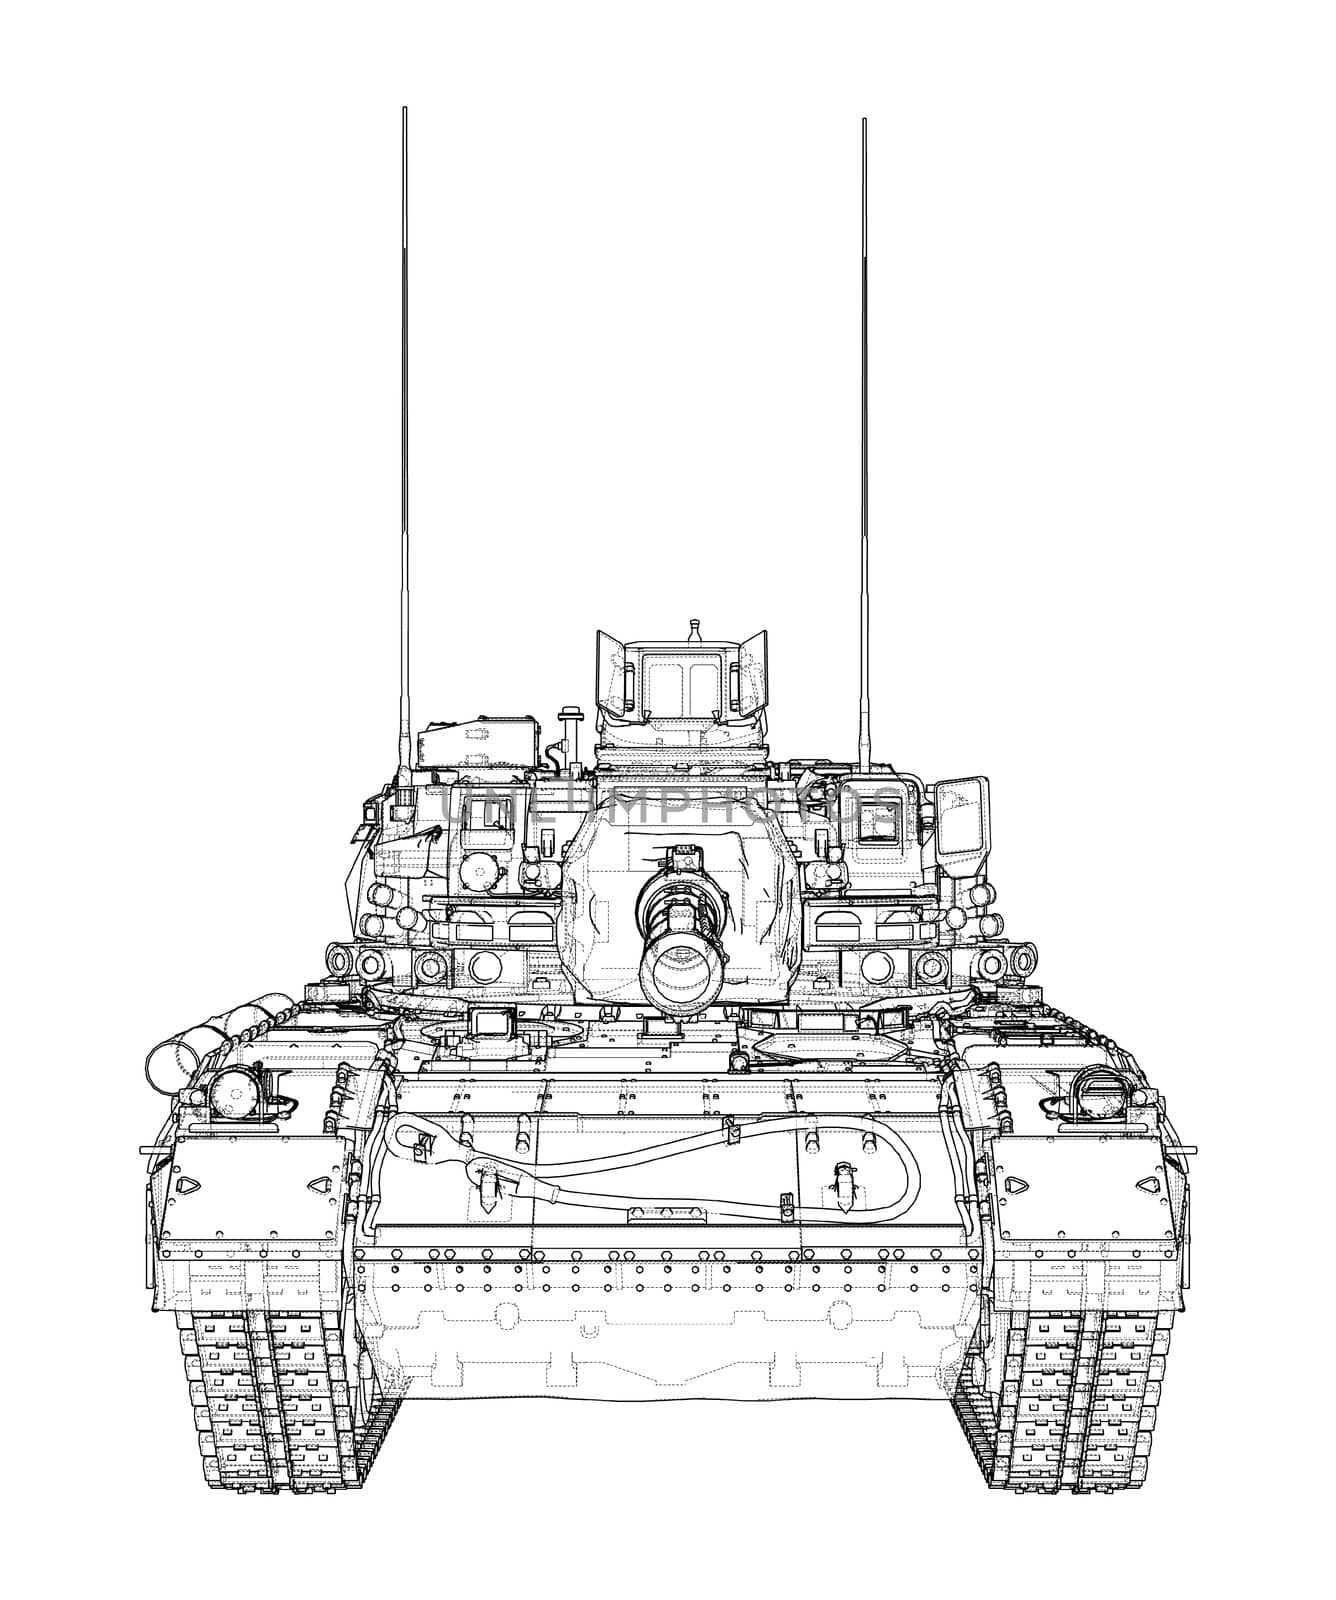 Military Tank on white. 3d illustration. Wire-frame style